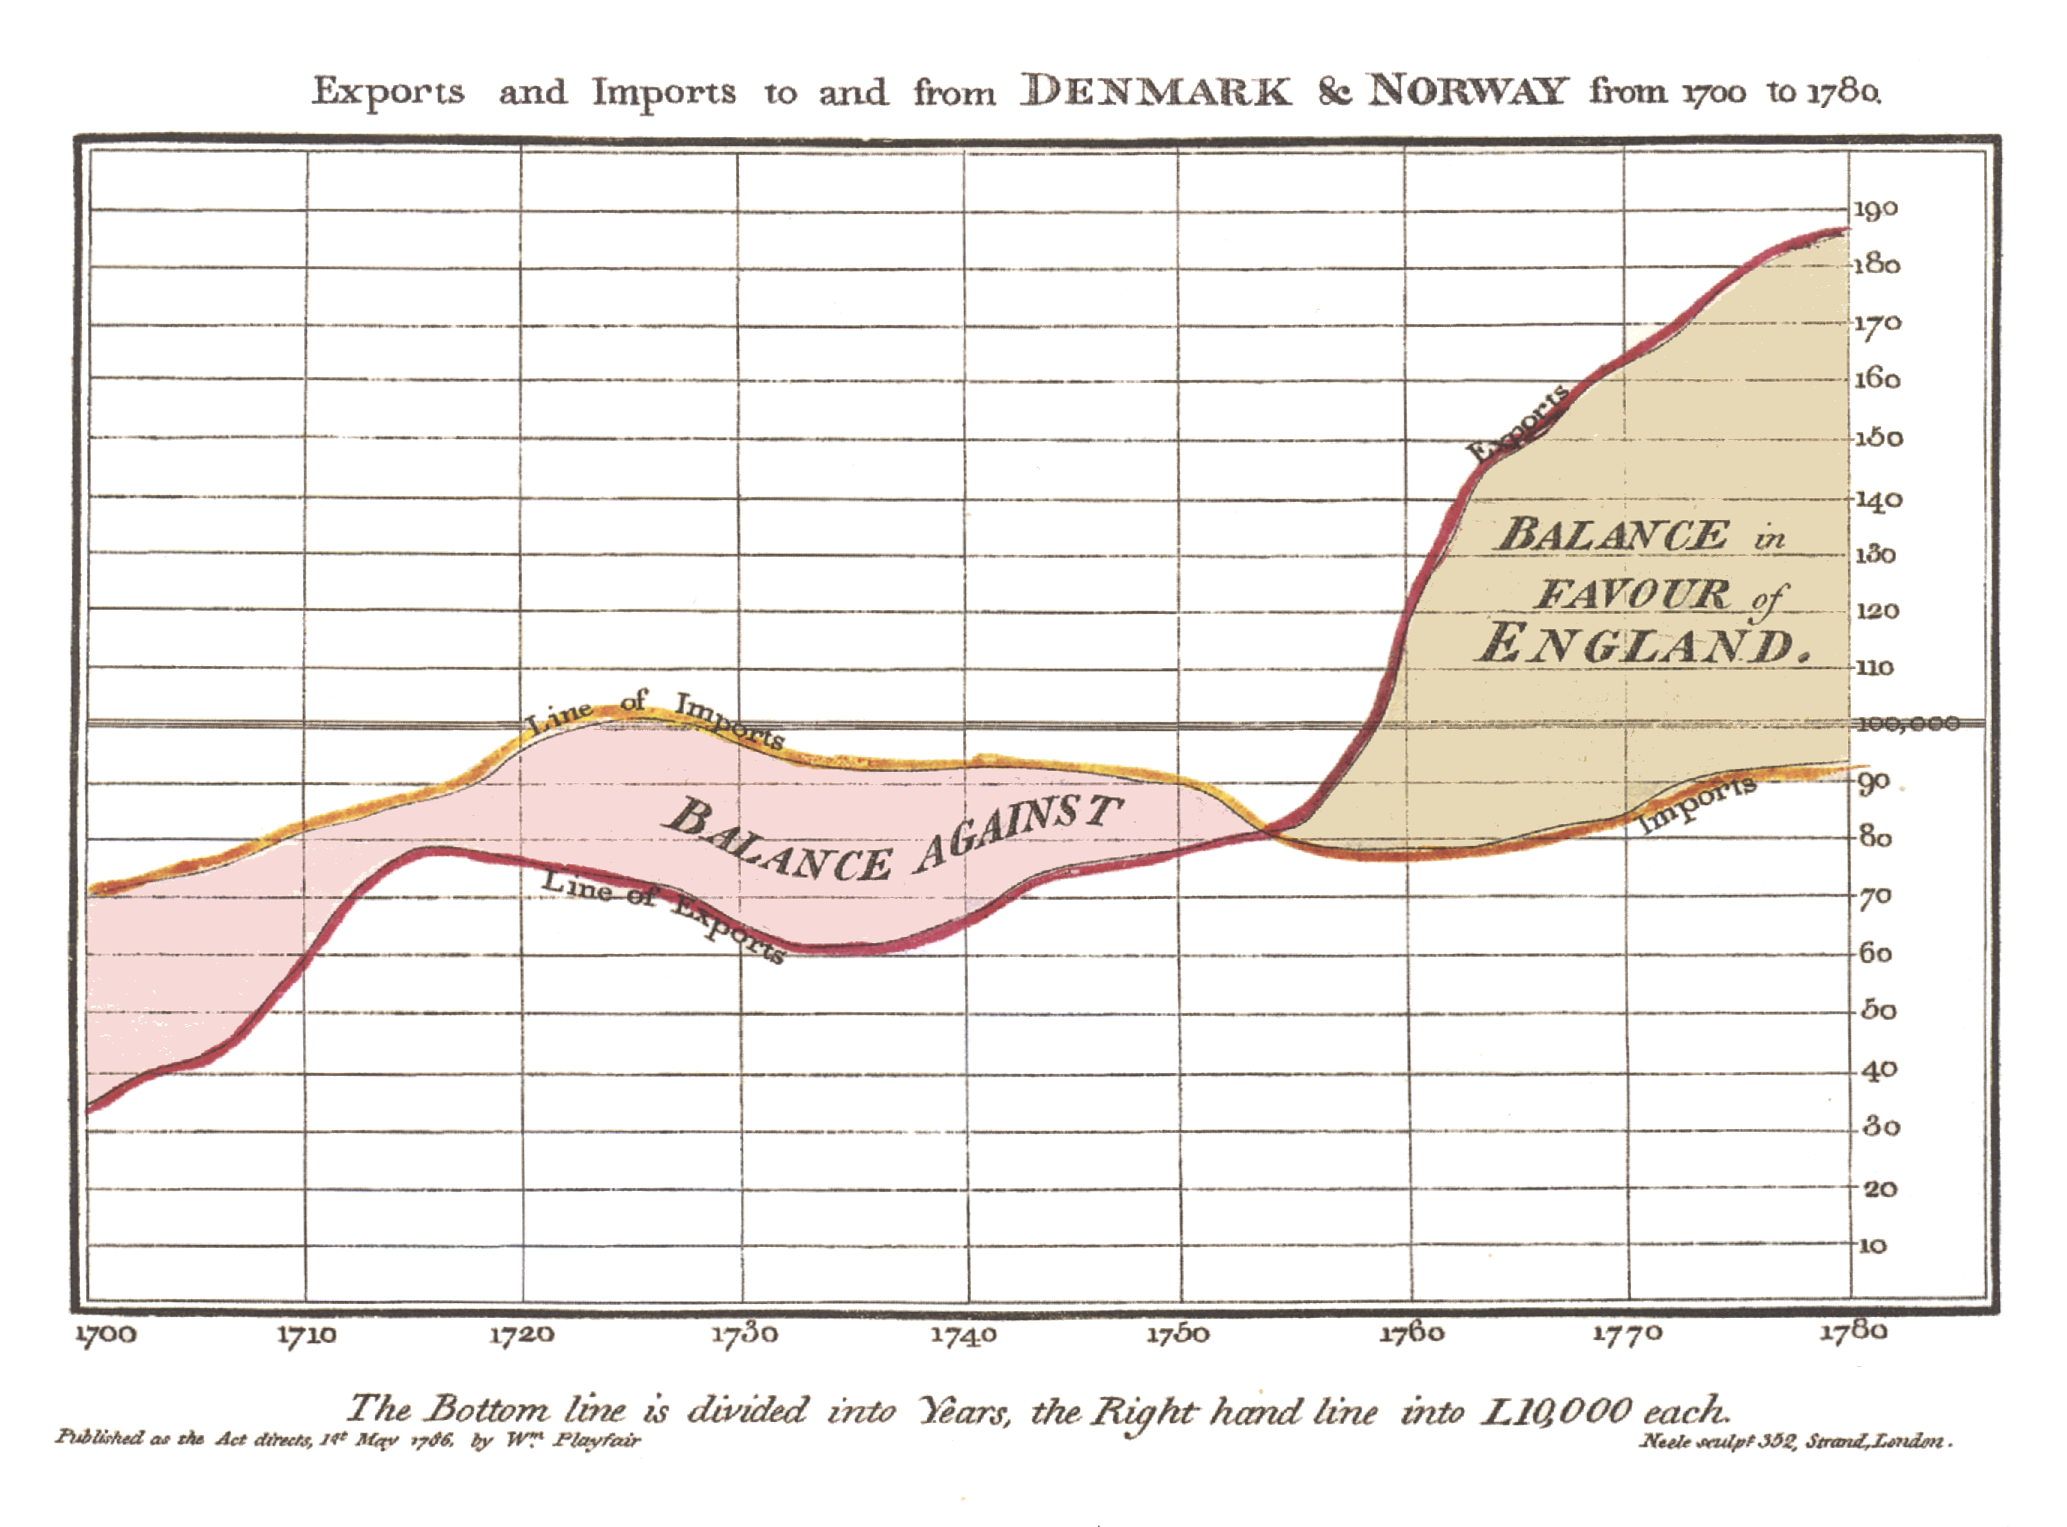 Time Series of Exports and Imports, Playfair